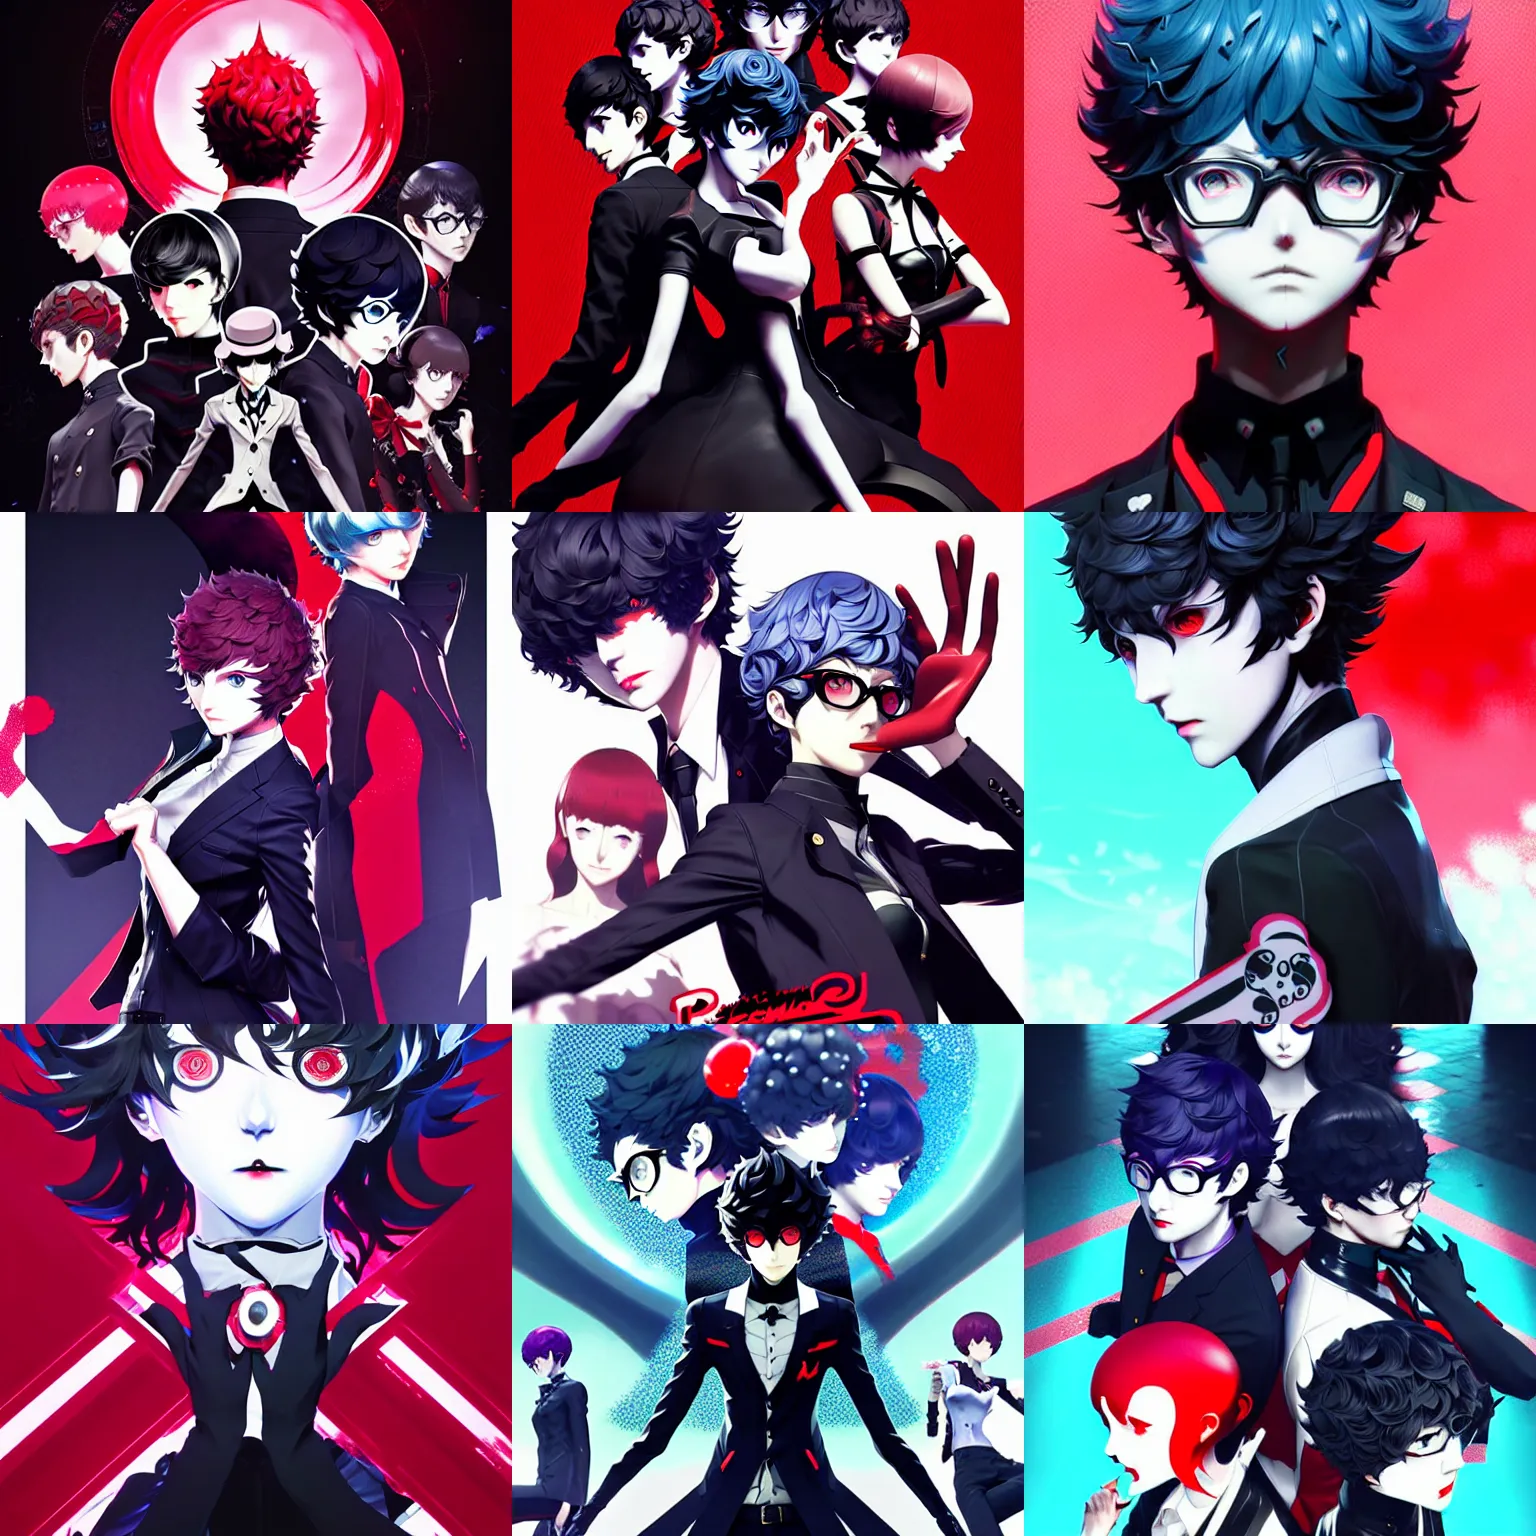 The Art of Persona